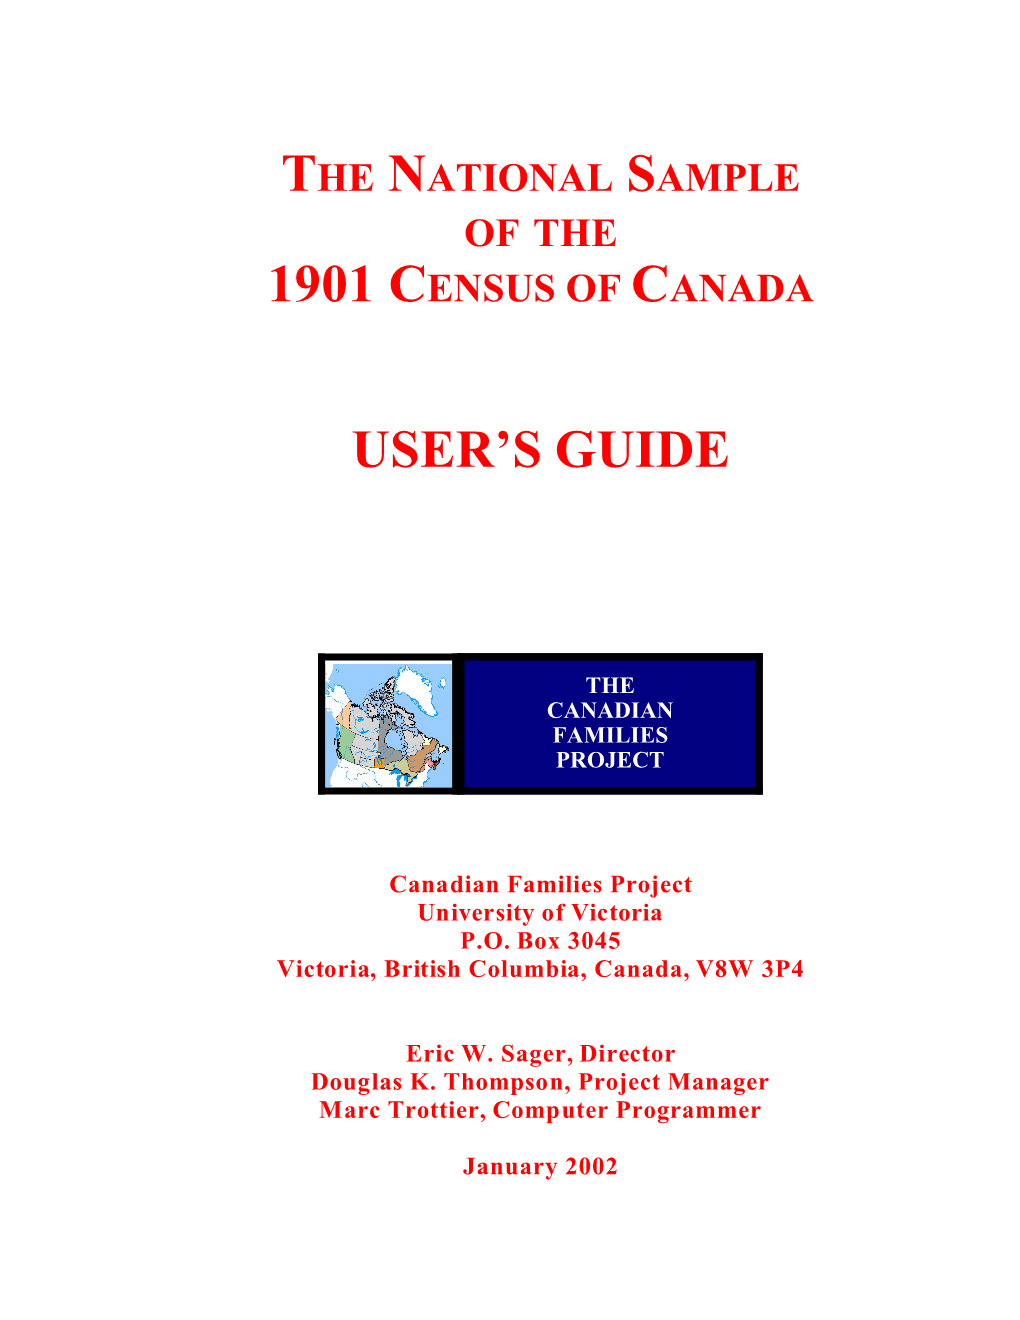 The National Sample of the 1901 Census of Canada